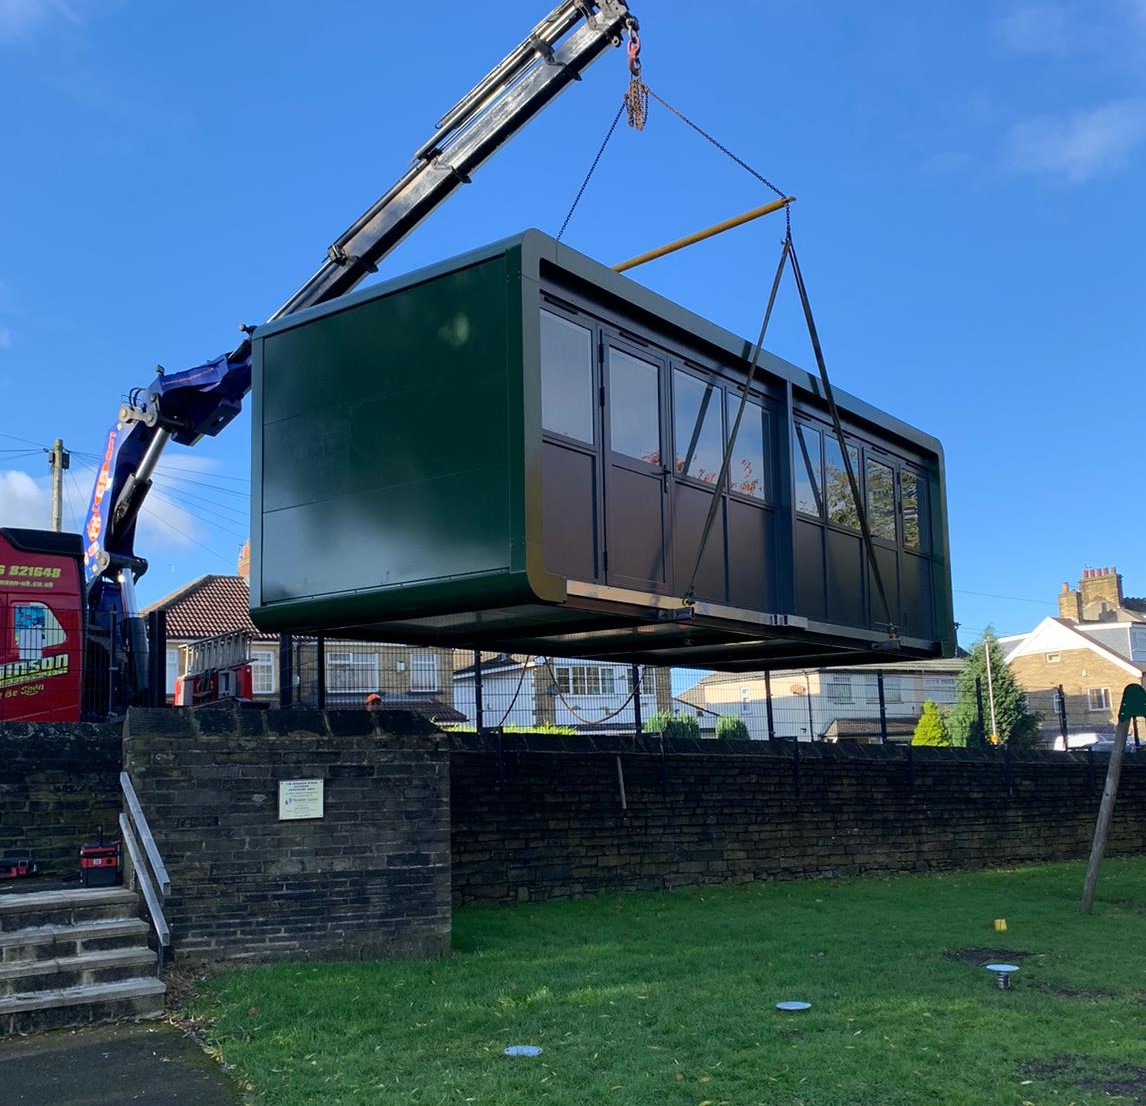 Another amazing Breakout pod delivered to a school in Bradford today! 📷

smartpod.com

#education #school #teachers #termtime #modular #student #librarylife #library #extraspace #classroomideas #classroomsetup #classroommanagement #classroomorganization